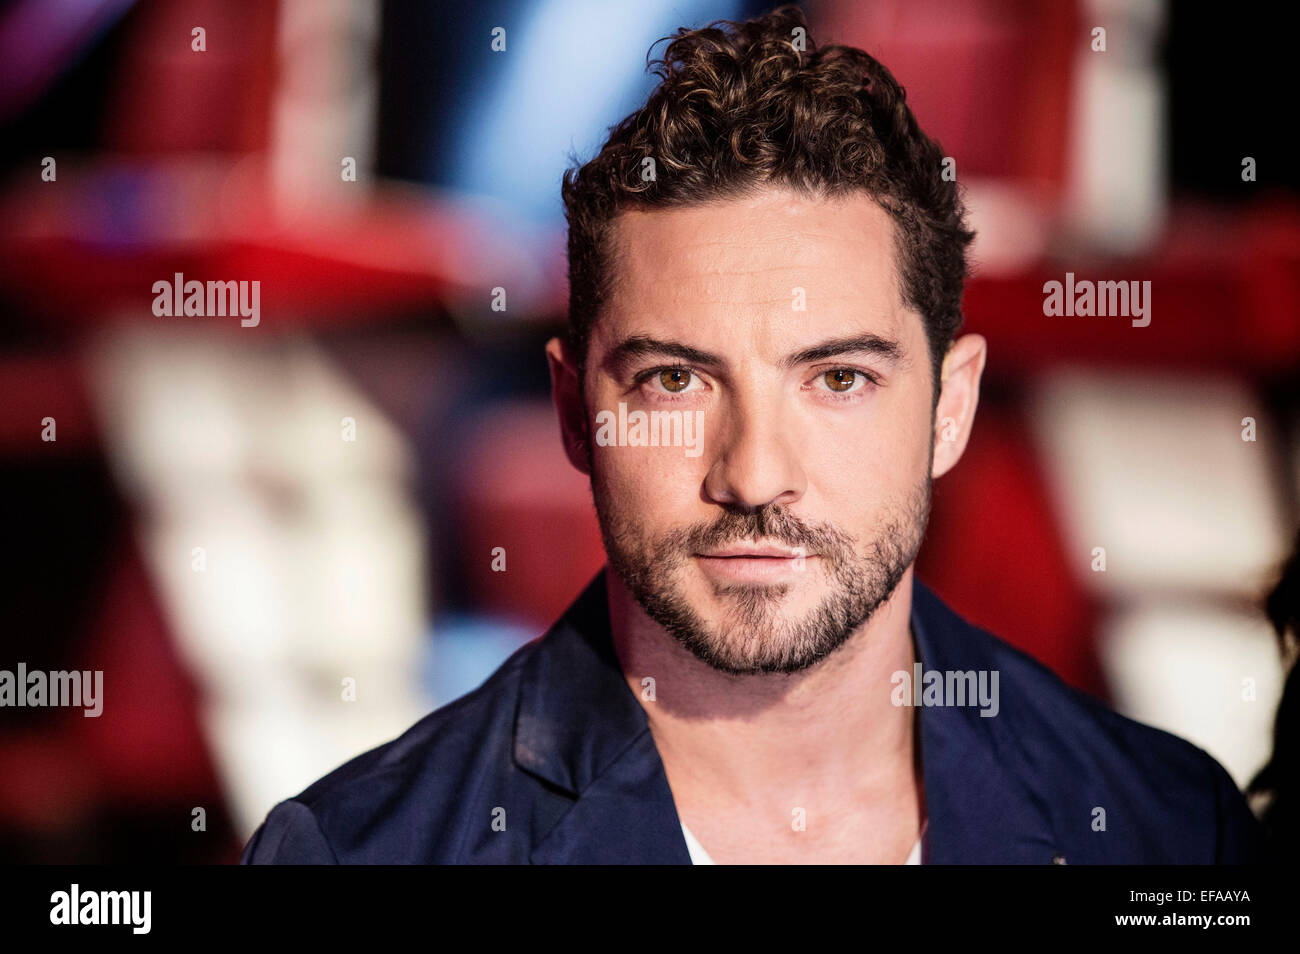 David Bisbal at a Photocall for the Telecinvo Casting Show 'La Voz Kids' at the Picasso Studios in Madrid, Spain. On January 29, 2015./picture alliance Stock Photo